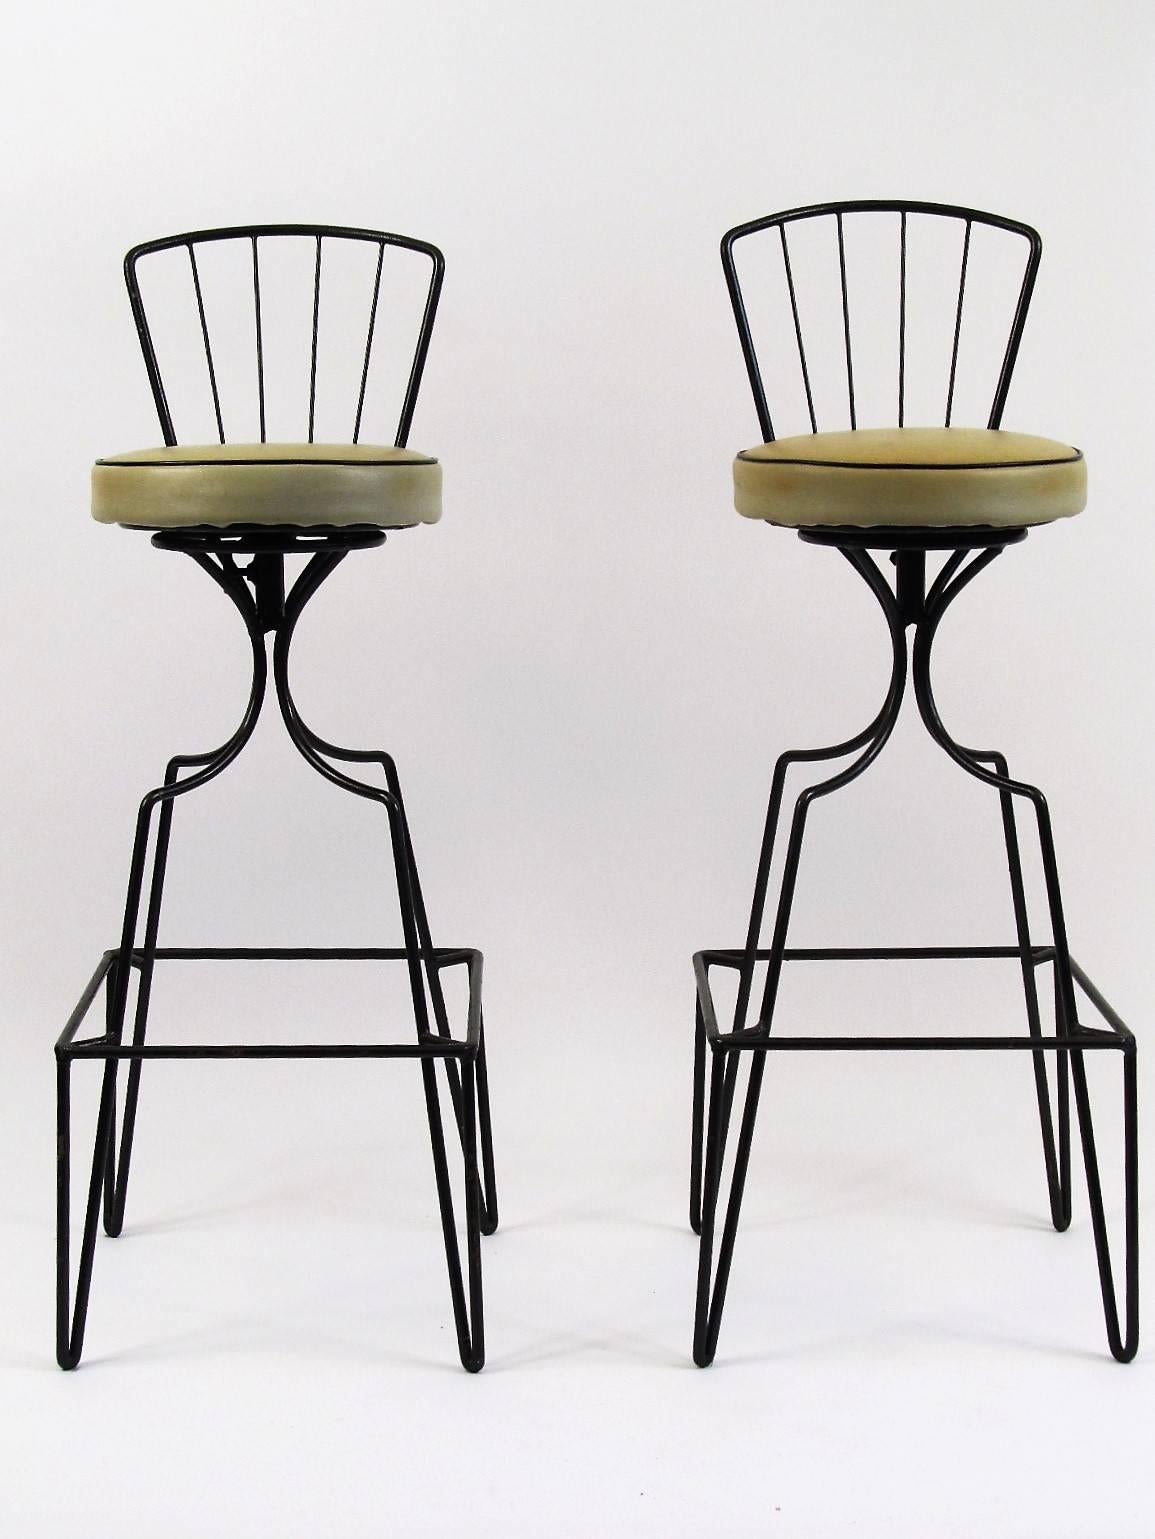 A distinctively 1950s look, this pair of bar stools would work well with any 1950s bar. The seats rotate smoothly and the upholstery appears to be original and in good condition.